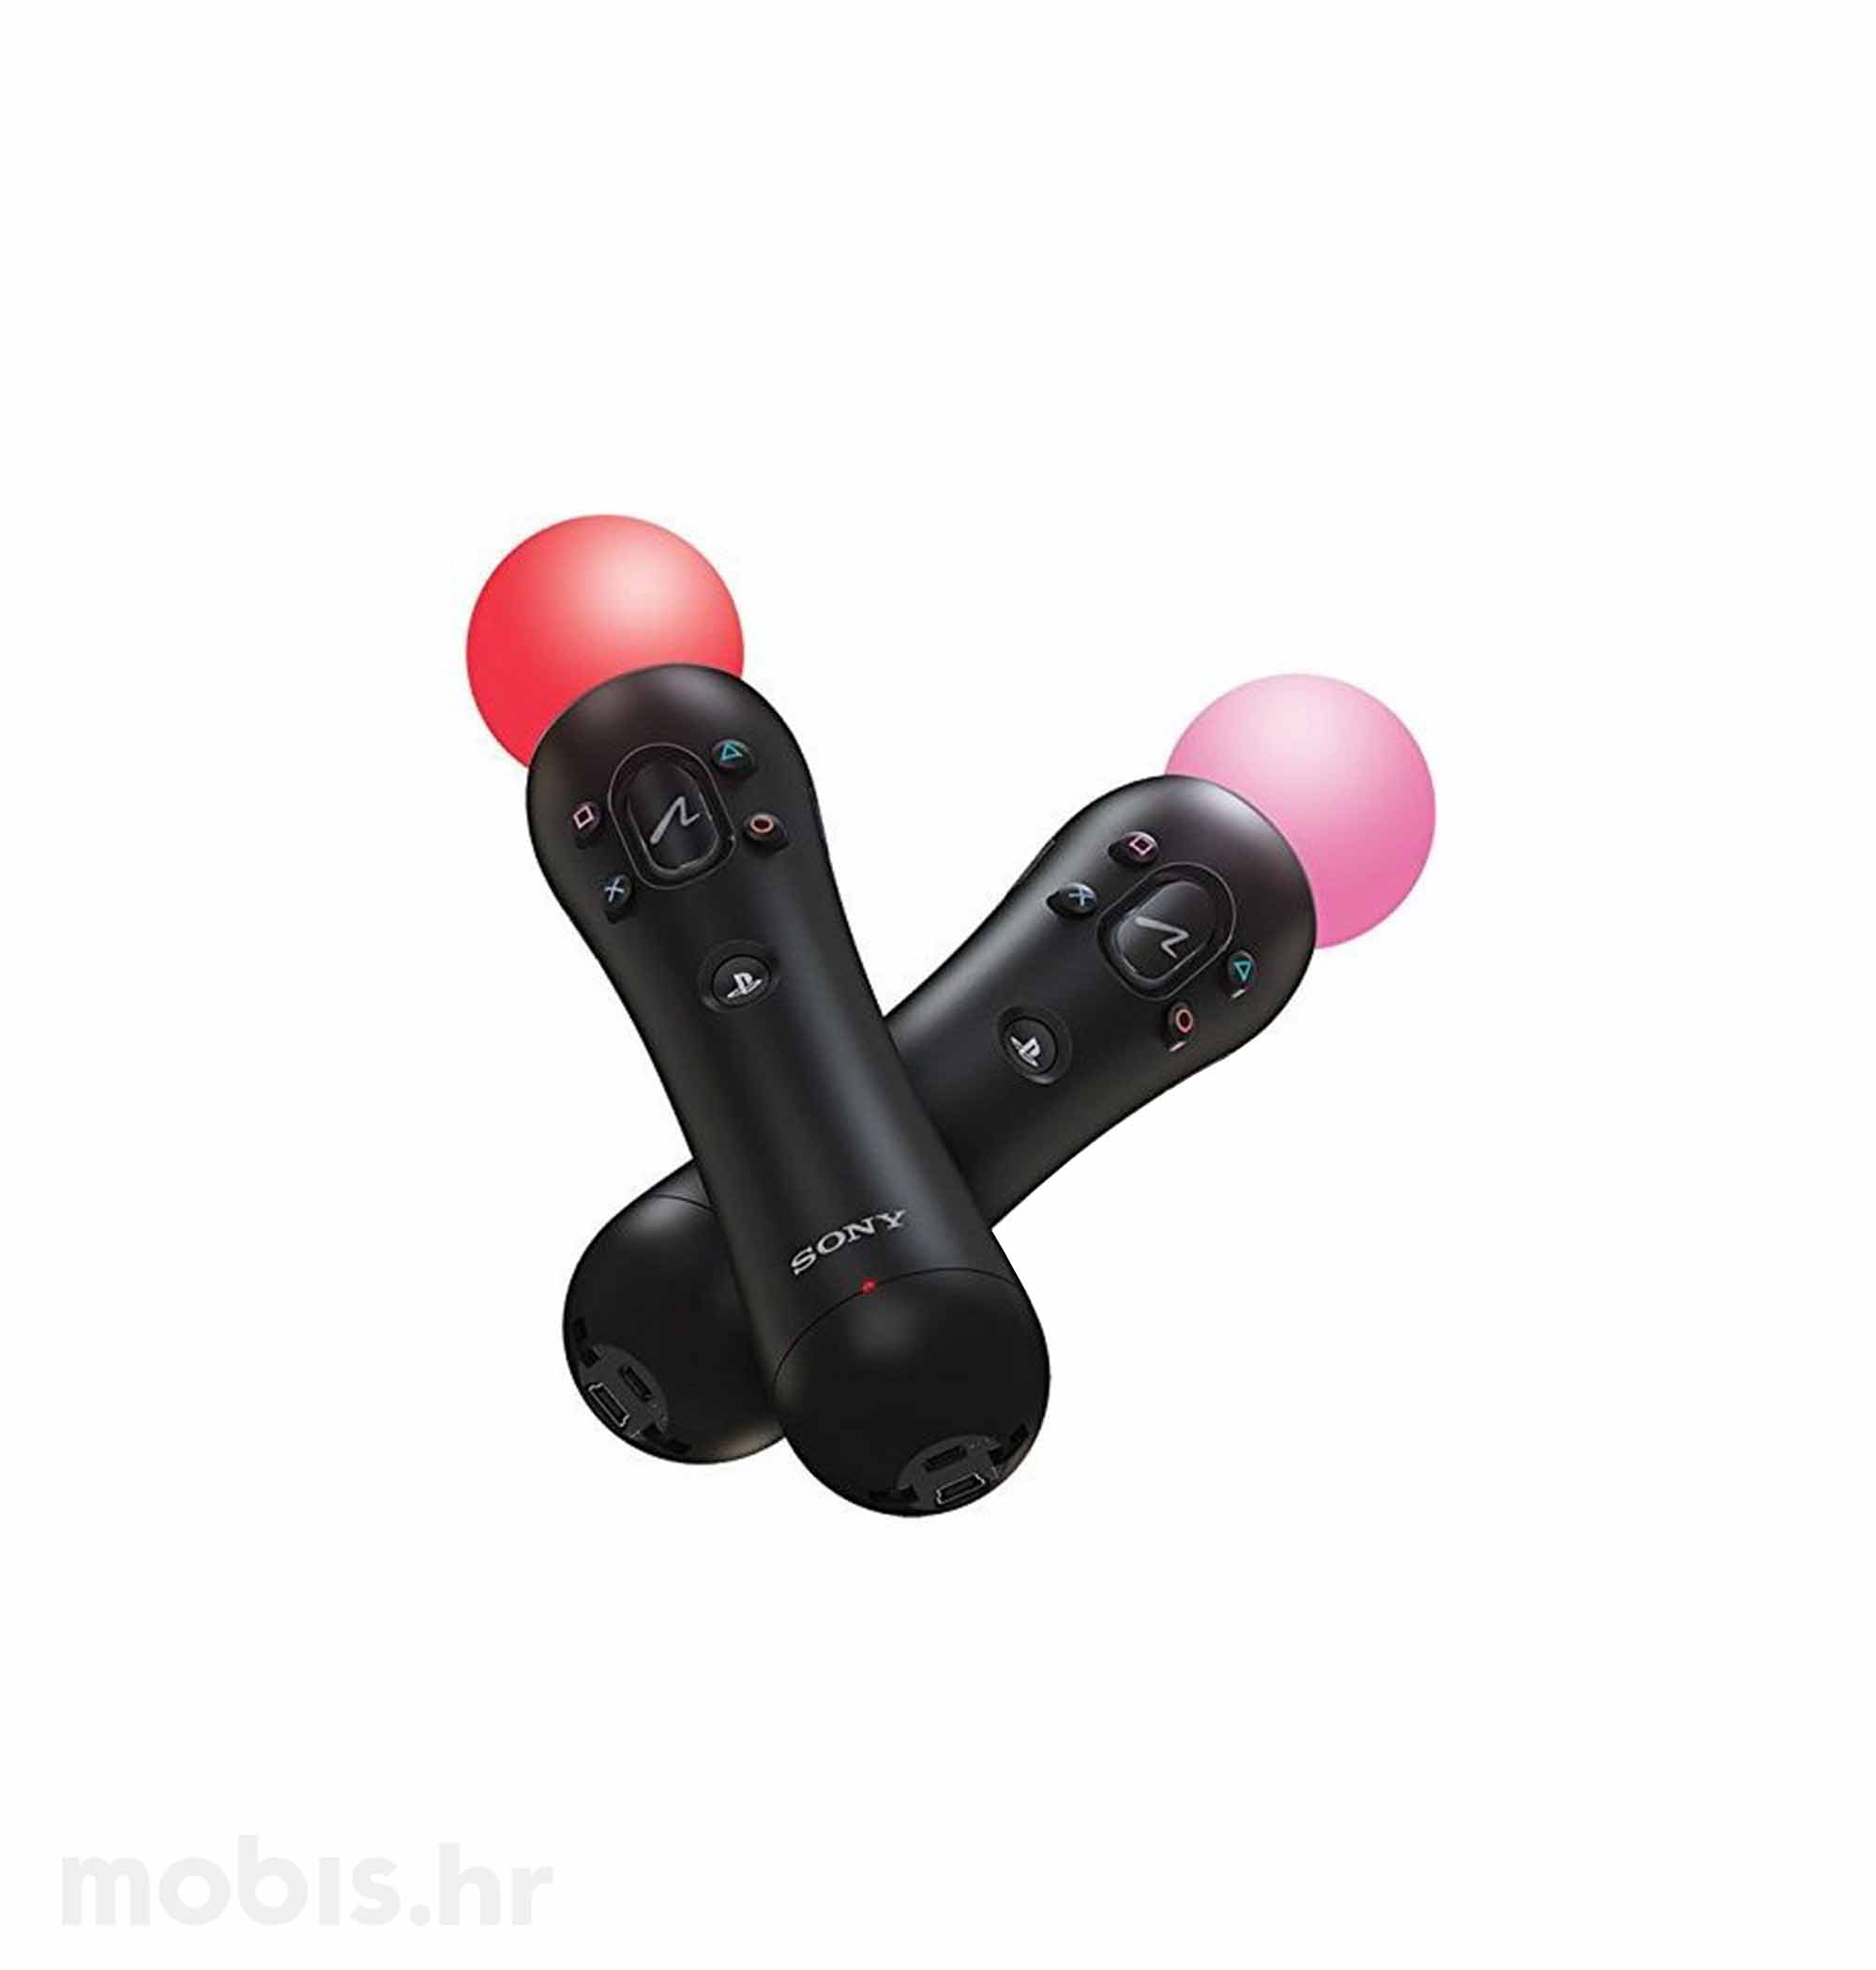 Sp vr. Датчик движения Sony move Motion Controllers two Pack (Cech-zcm2e), черный. Sony ps4 move Motion Controller. Sony move Motion Controller Twin Pack PS move. Sony PS move Controller ps3.